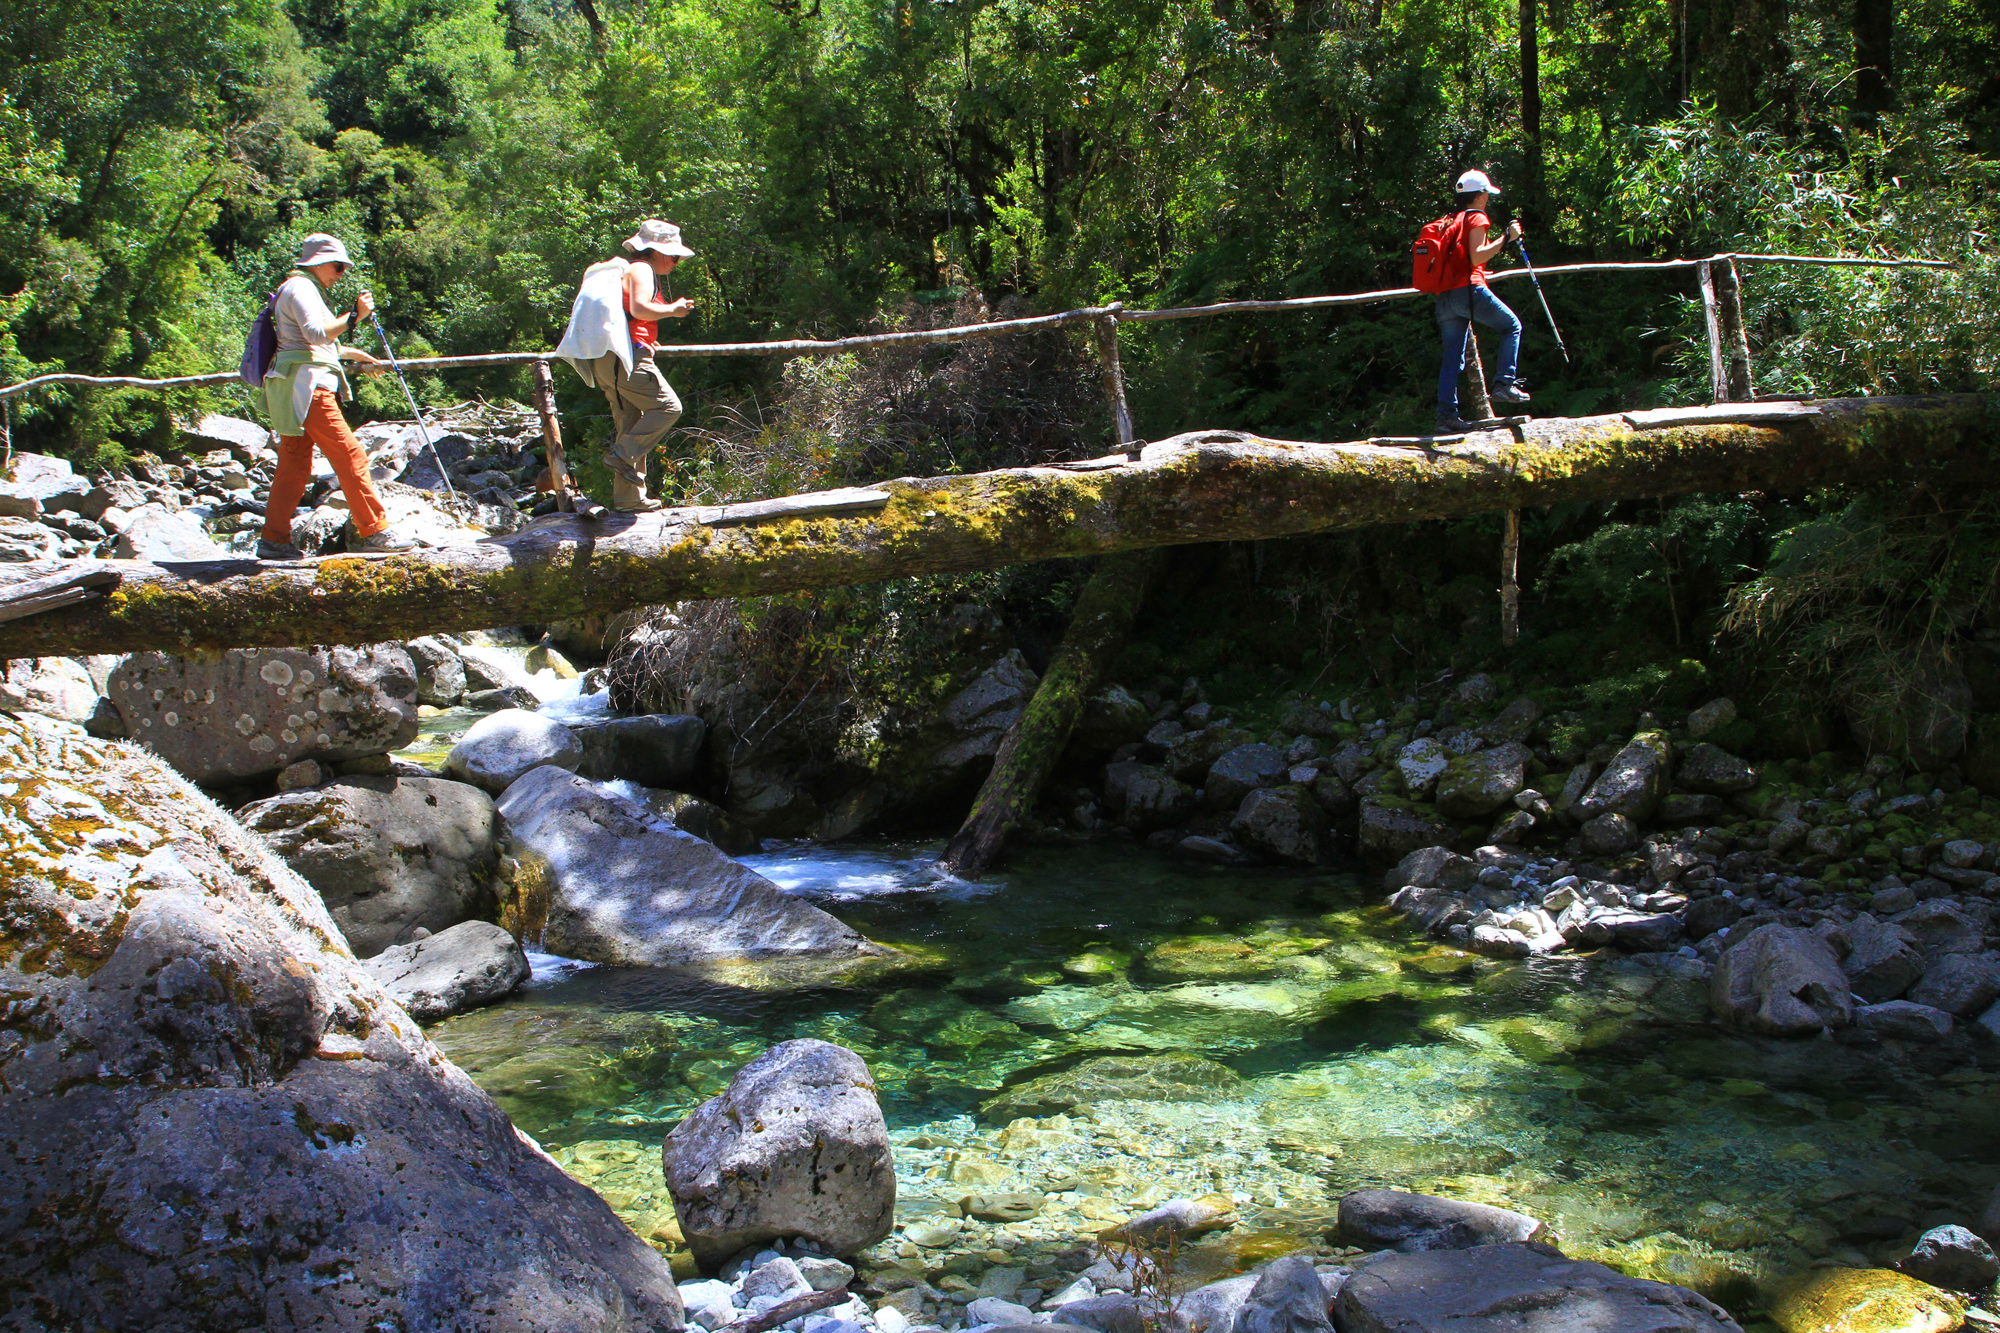 1.There are many attractive bridges on the hiking trails, often utilizing fallen trees. 